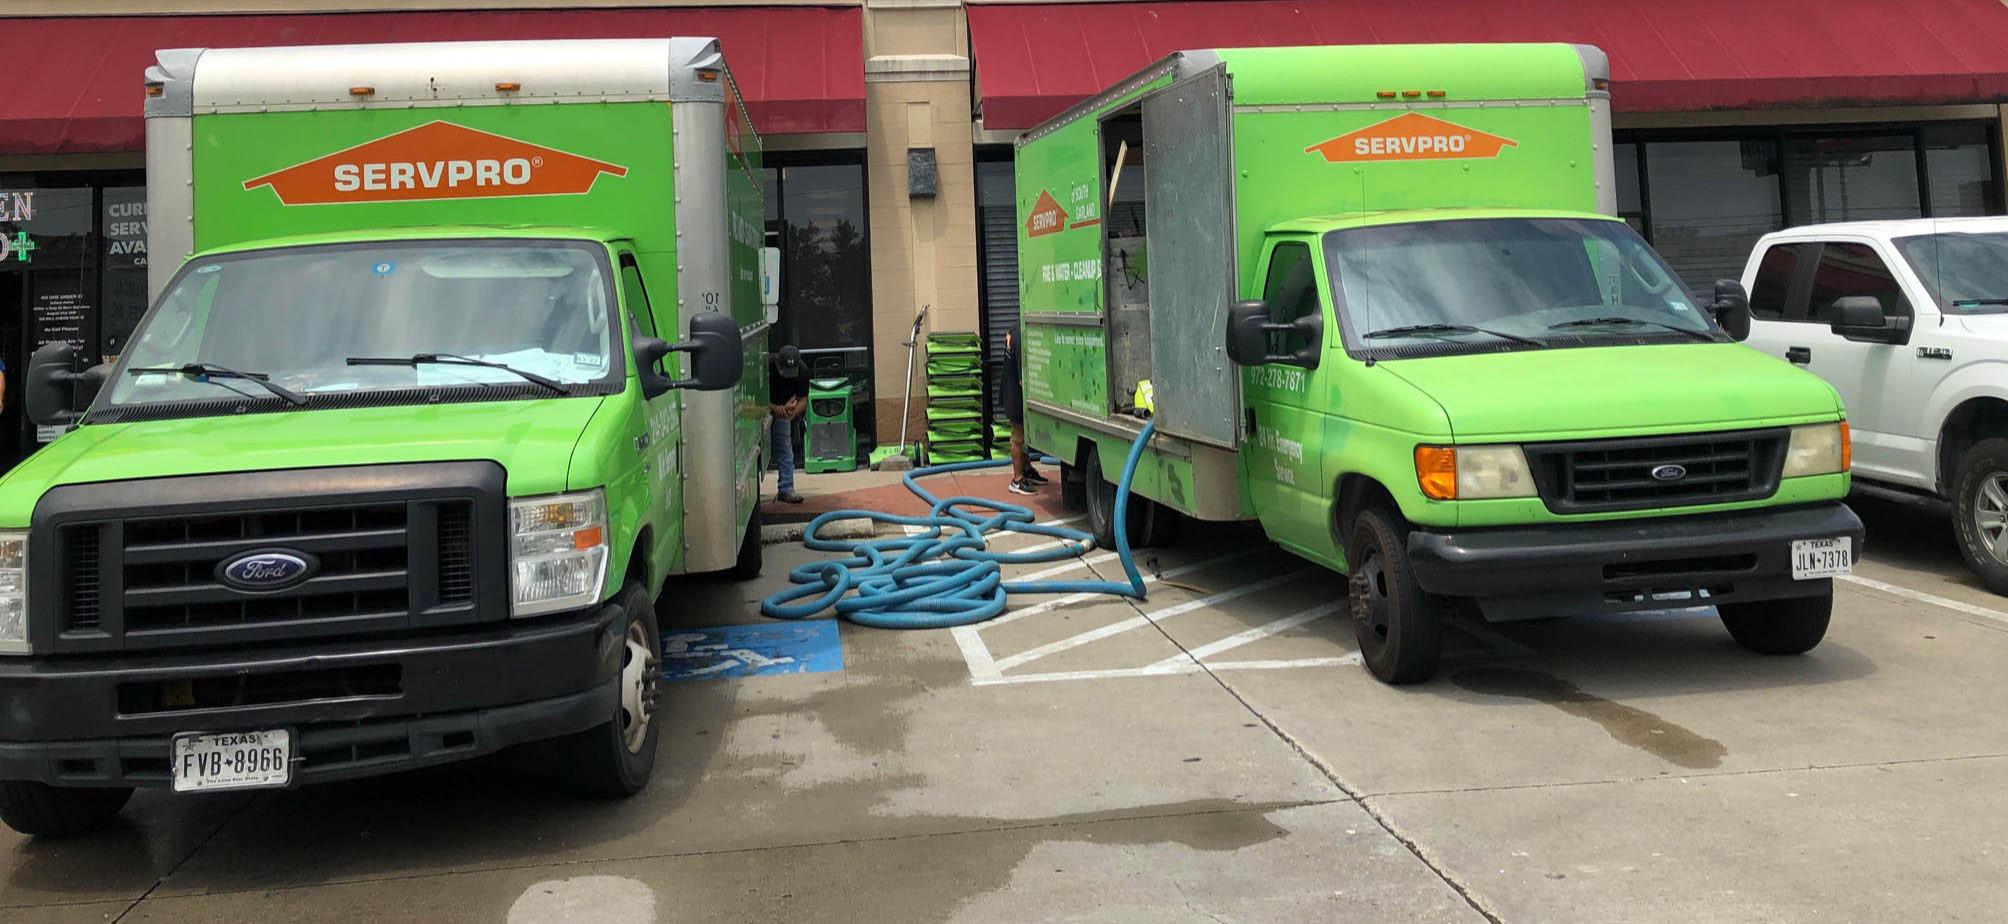 When you need water, fire, or mold damage emergency services in Waterford Estates, TX, call SERVPRO of South Garland at your earliest convenience. We have the equipment and expertise to handle any job big or small.